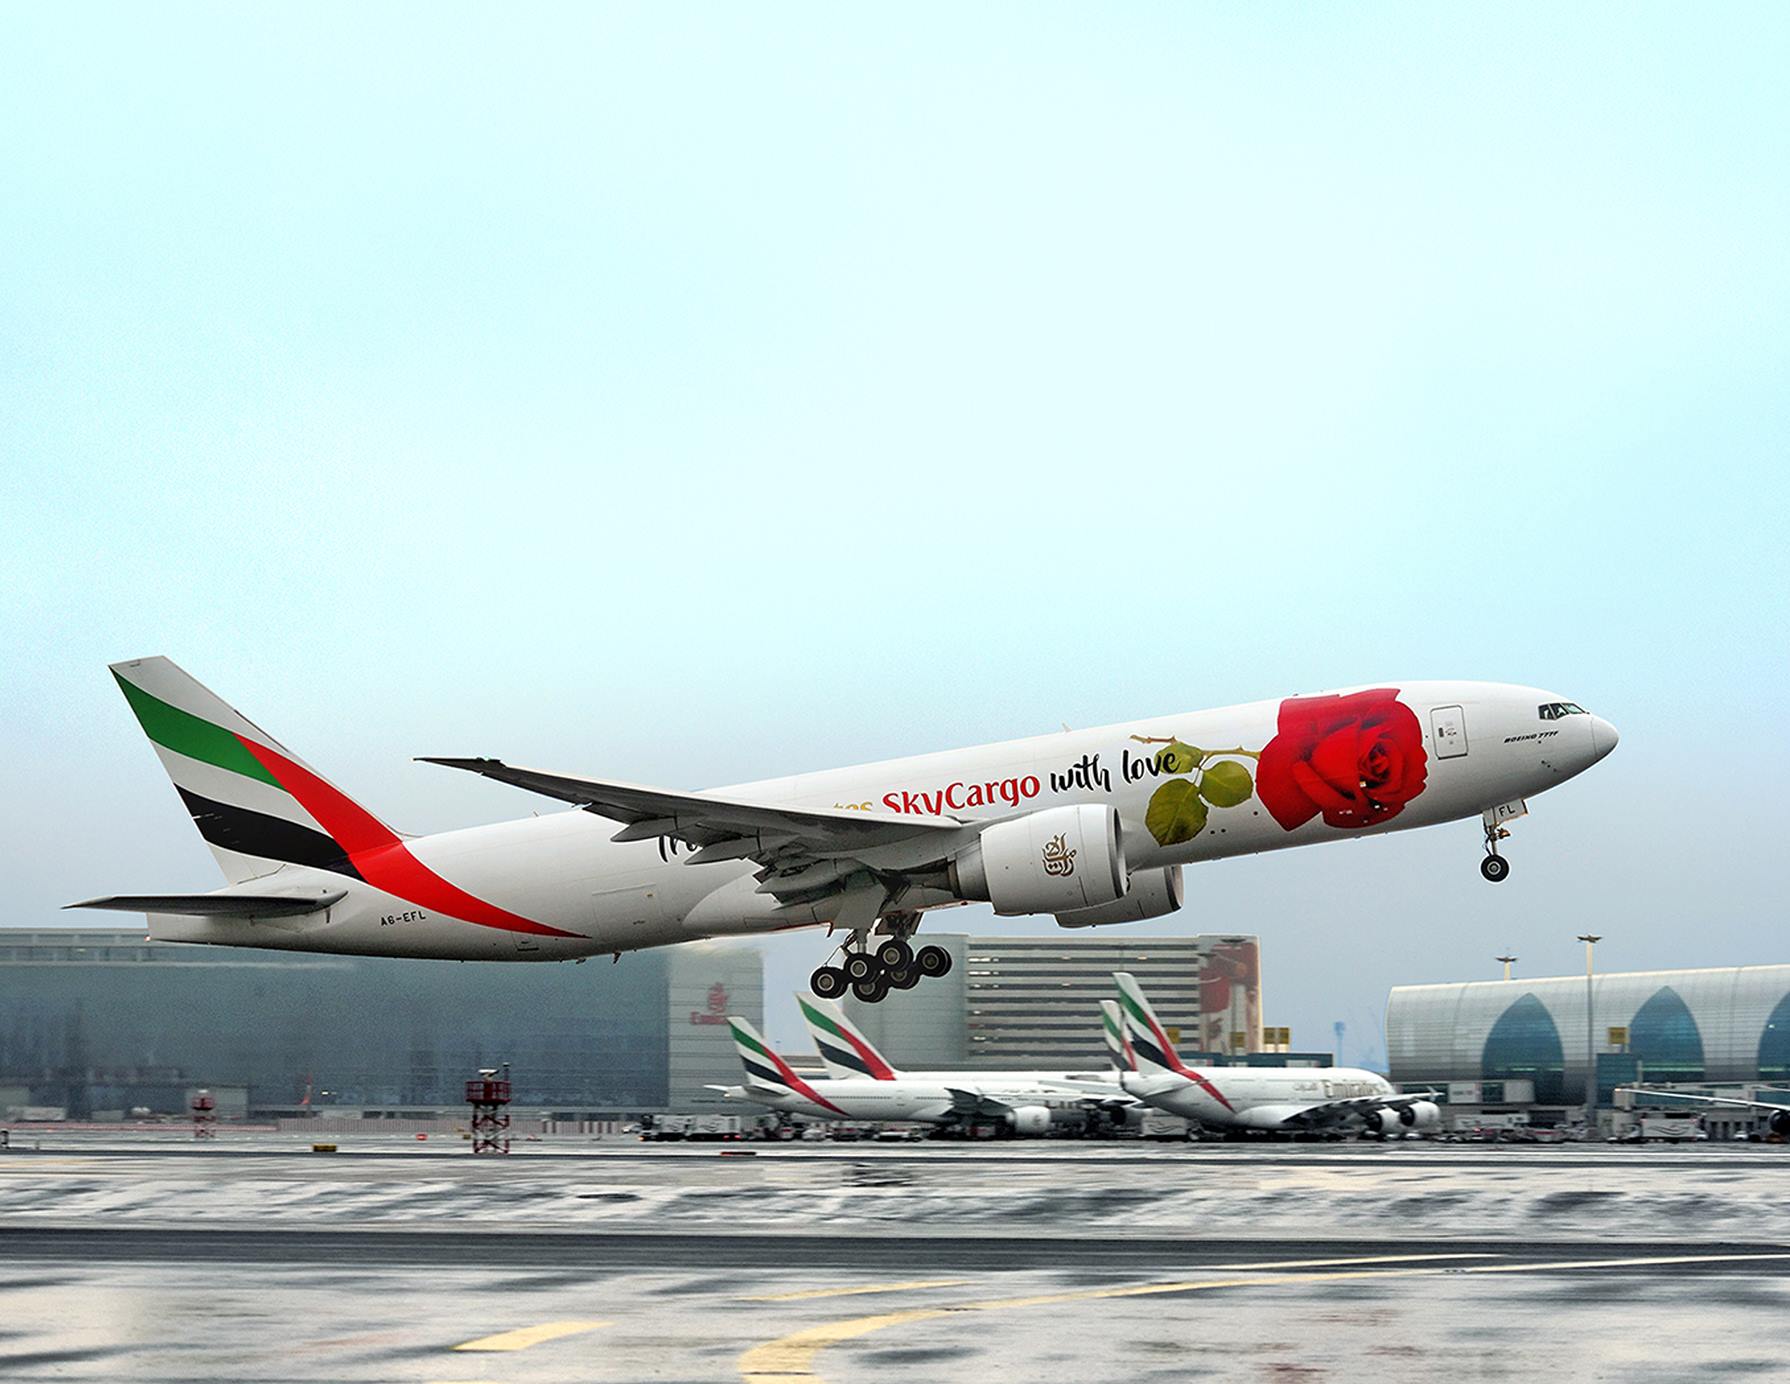 From Emirates SkyCargo With Love